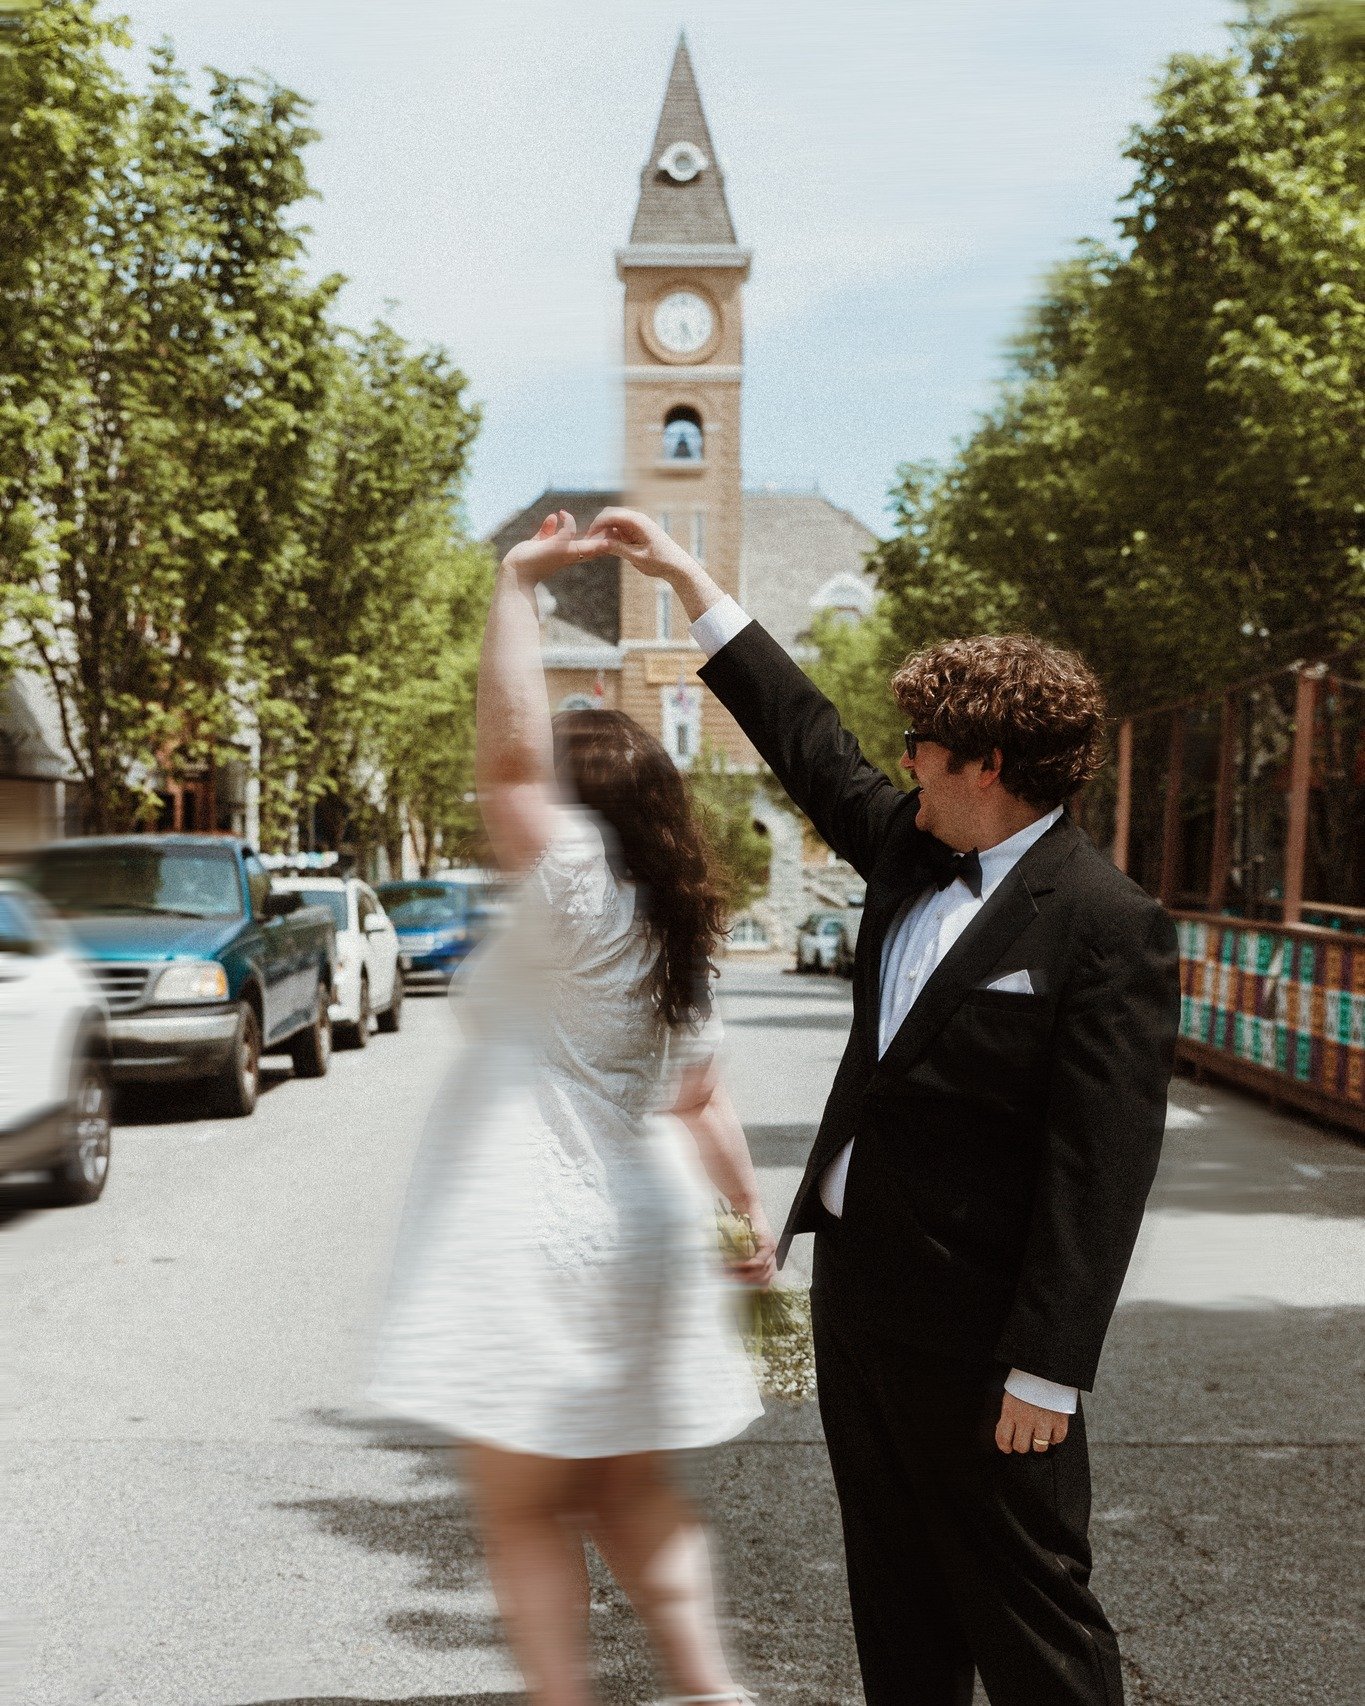 Top three things after you get engaged: 
1) Enjoy it and celebrate 
2) Tell ya support people 
3) Figure out a budget and what's most important. (you might do this a few times in the process of planning) 
.
.
.

#arkansasweddingplanner #arkansaselope